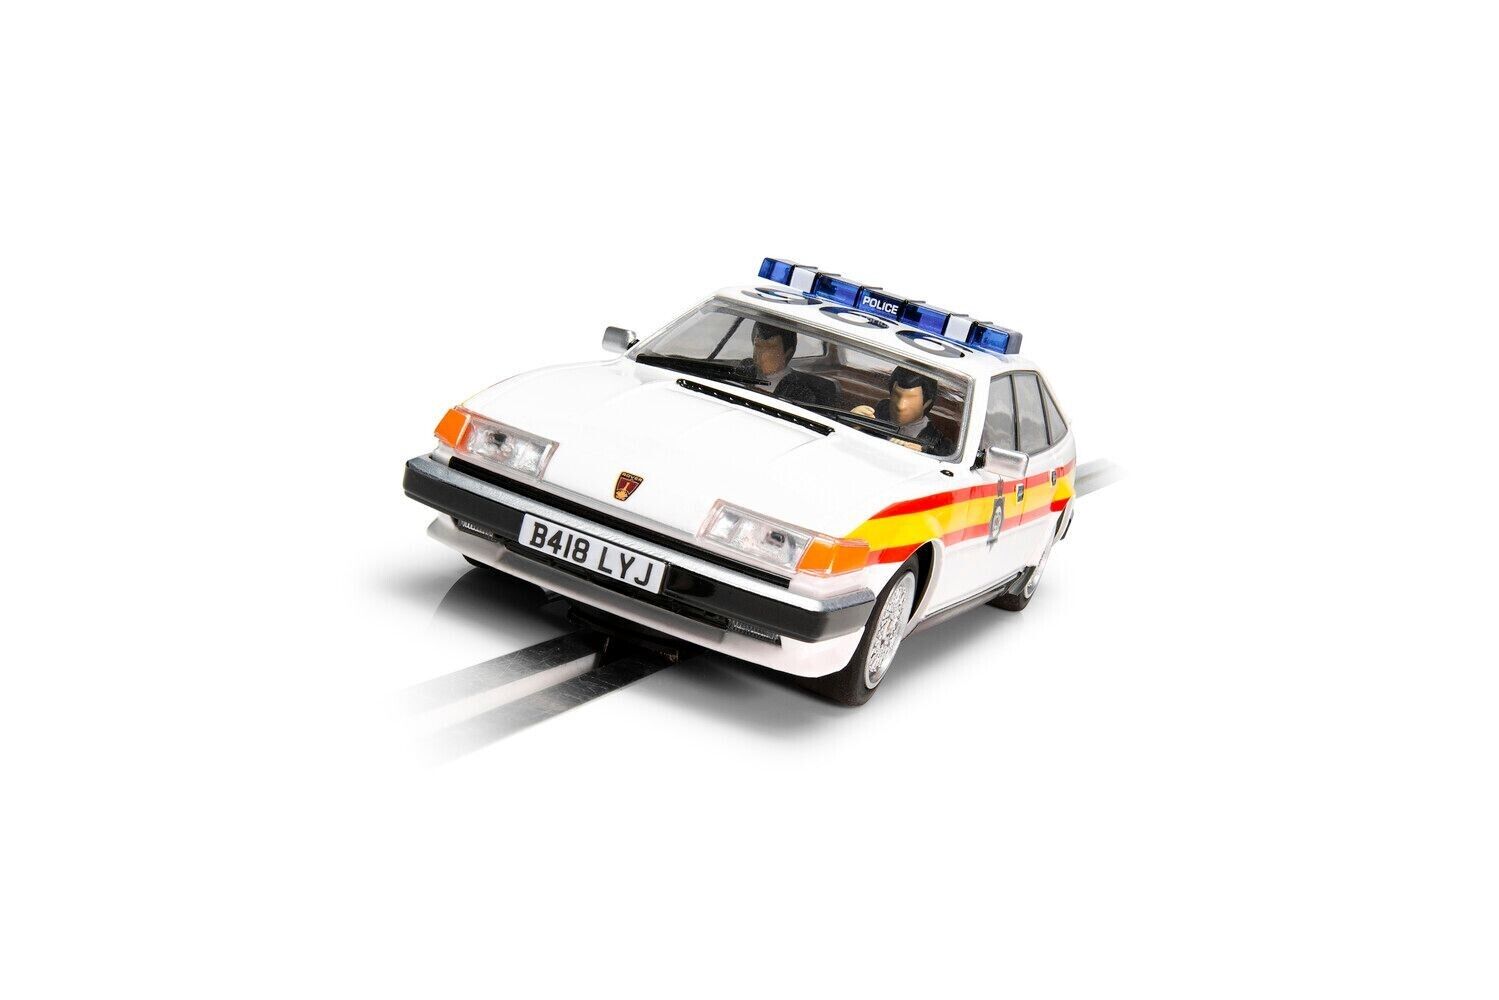 Product Image - Scalextric C4342 Rover SD1 - Police Edition Slot Car 1:32 Scale